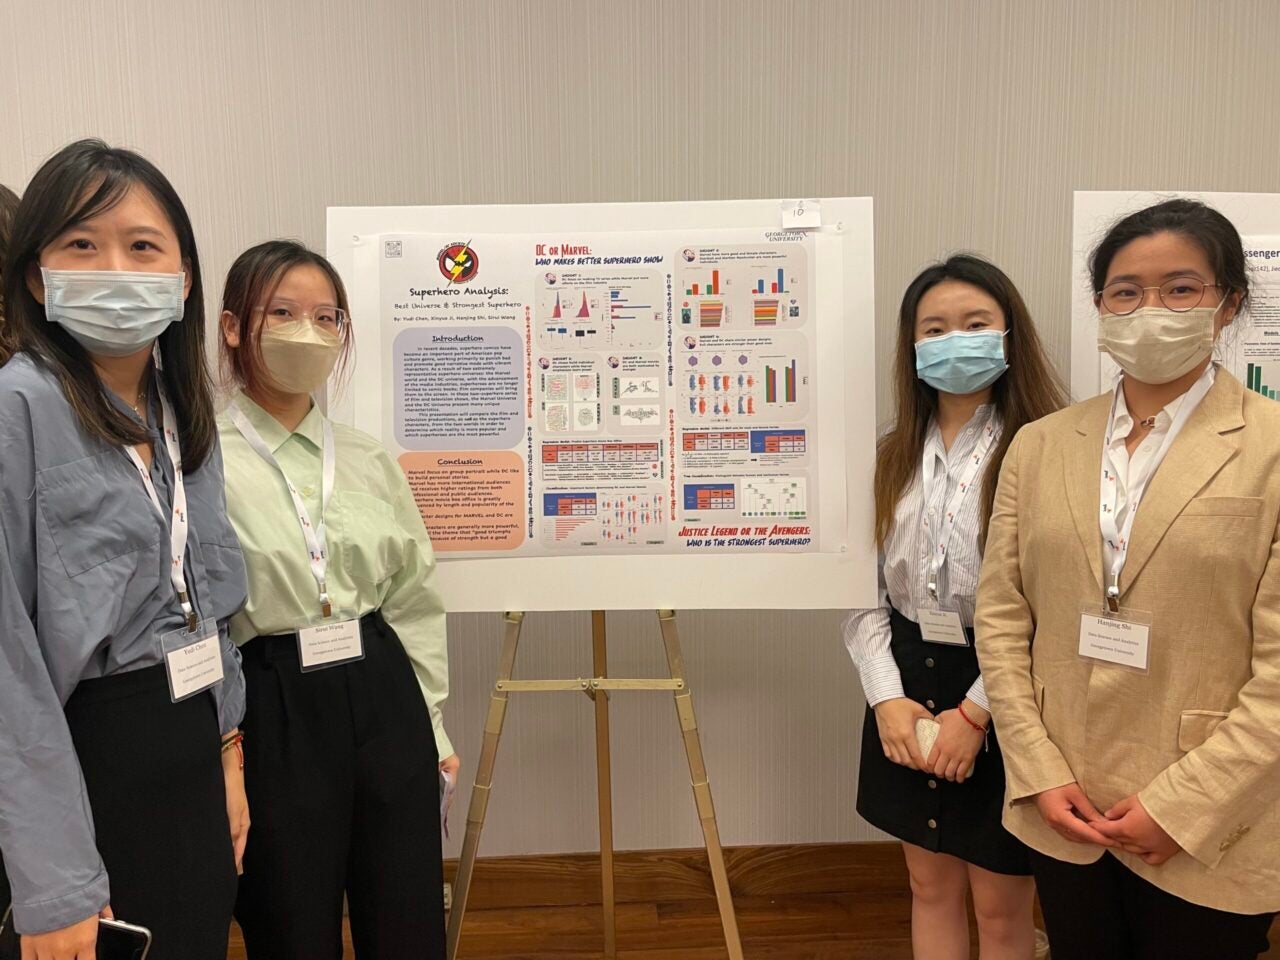 DSAN students stand on either side of the poster they are presenting